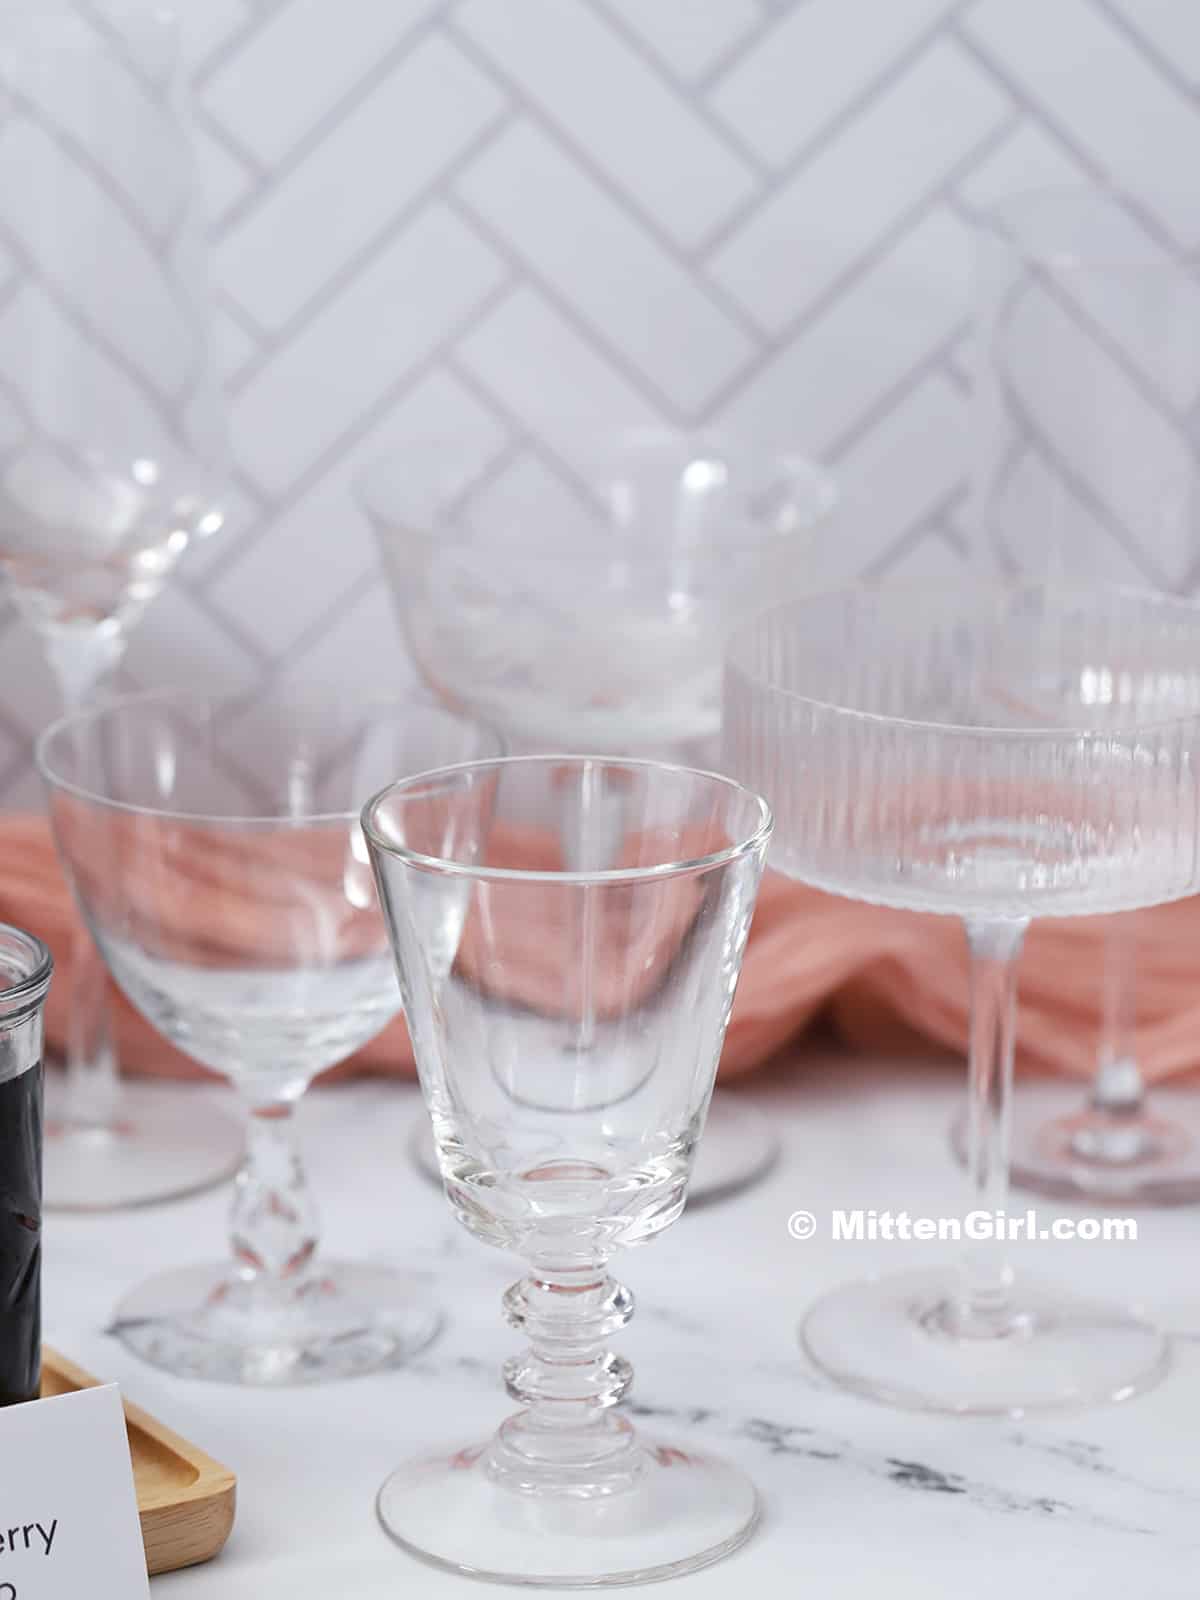 A selection of stemmed glassware set out on a mimosa bar. 